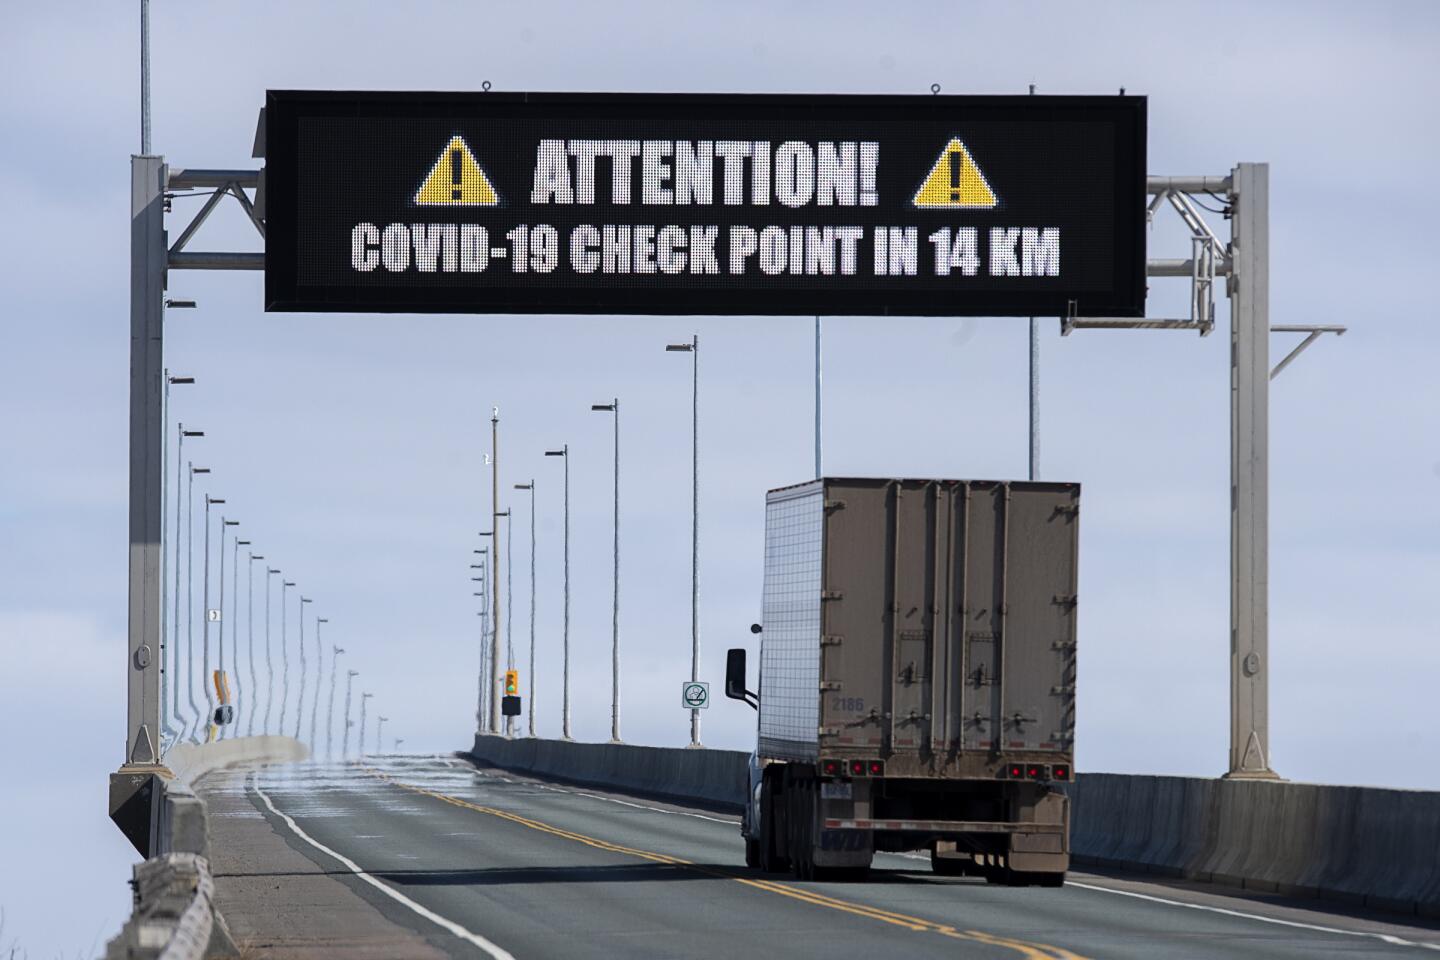 Canada: A sign indicates that provincial health department workers will stop traffic that has crossed the Confederation Bridge in Cape Jourimain, New Brunswick, Canada.